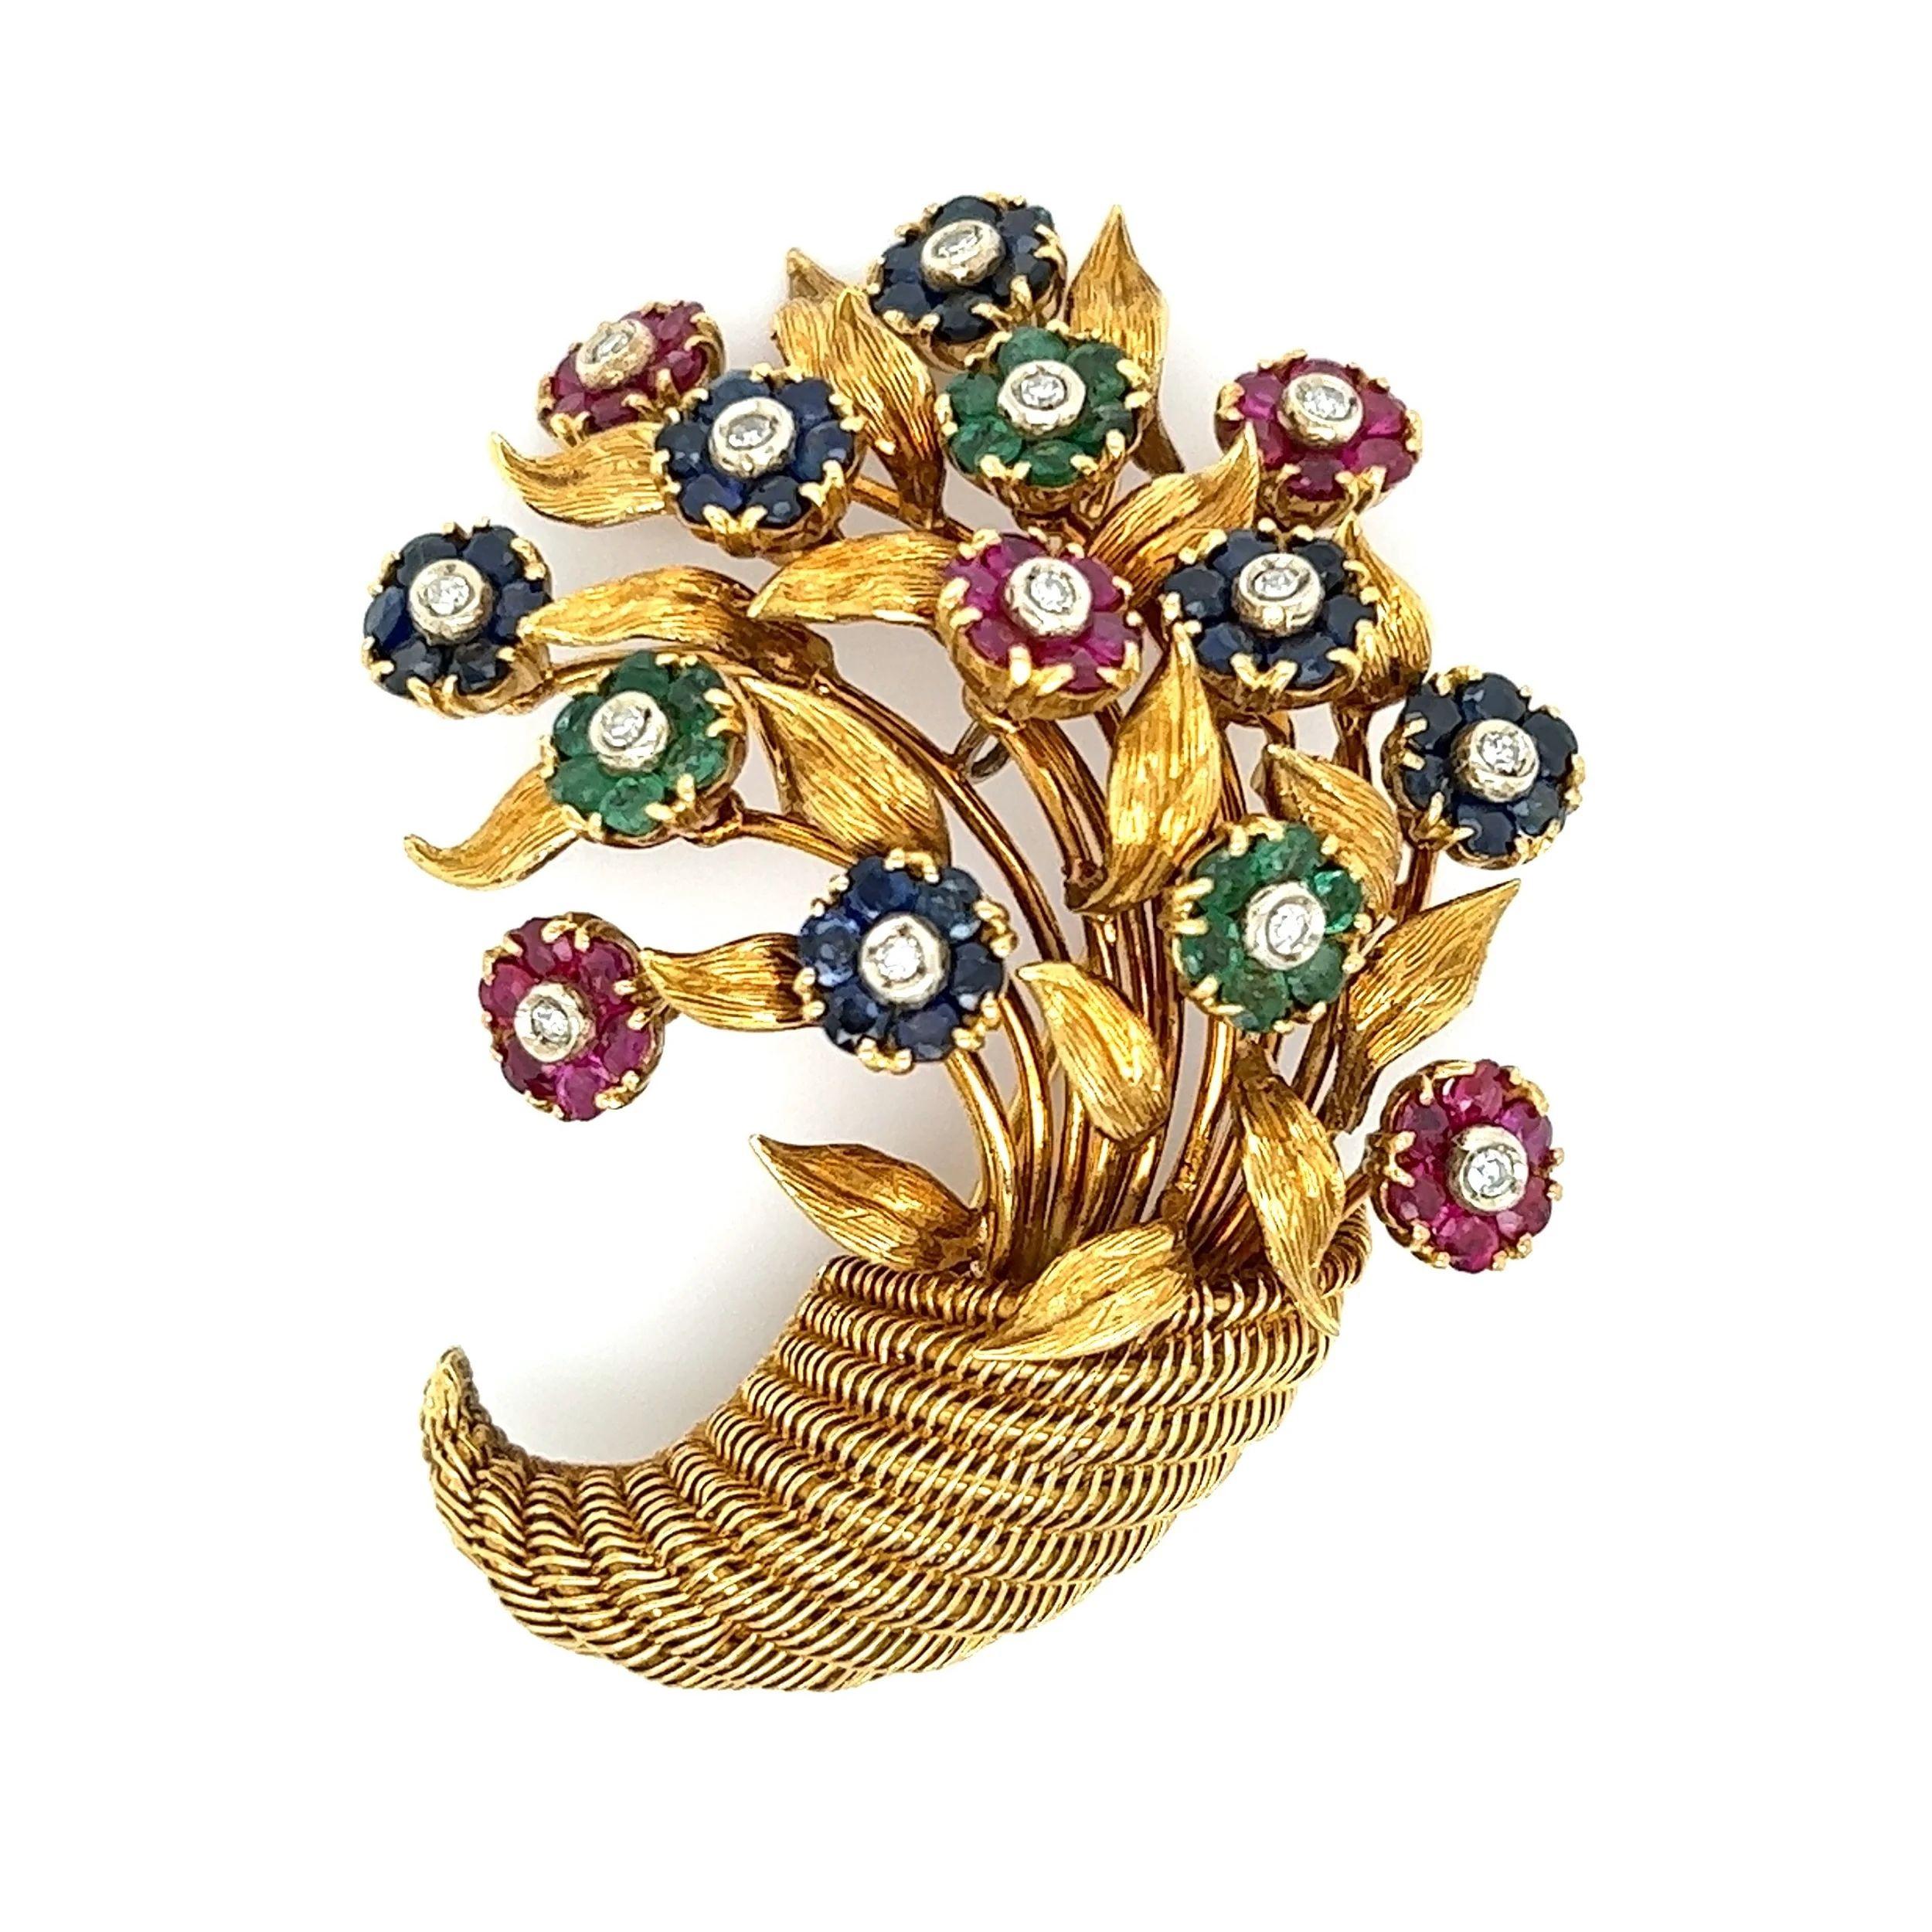 Simply Beautiful! Stylish and finely detailed Mid Century Modern Tiffany & Co. Italy Flower Basket Brooch Pin. Hand set, securely nestled, Articulating Diamond, Ruby, Sapphire and Emerald Gemstones. Featuring 14 Diamonds approx. 0.28tcw, 36